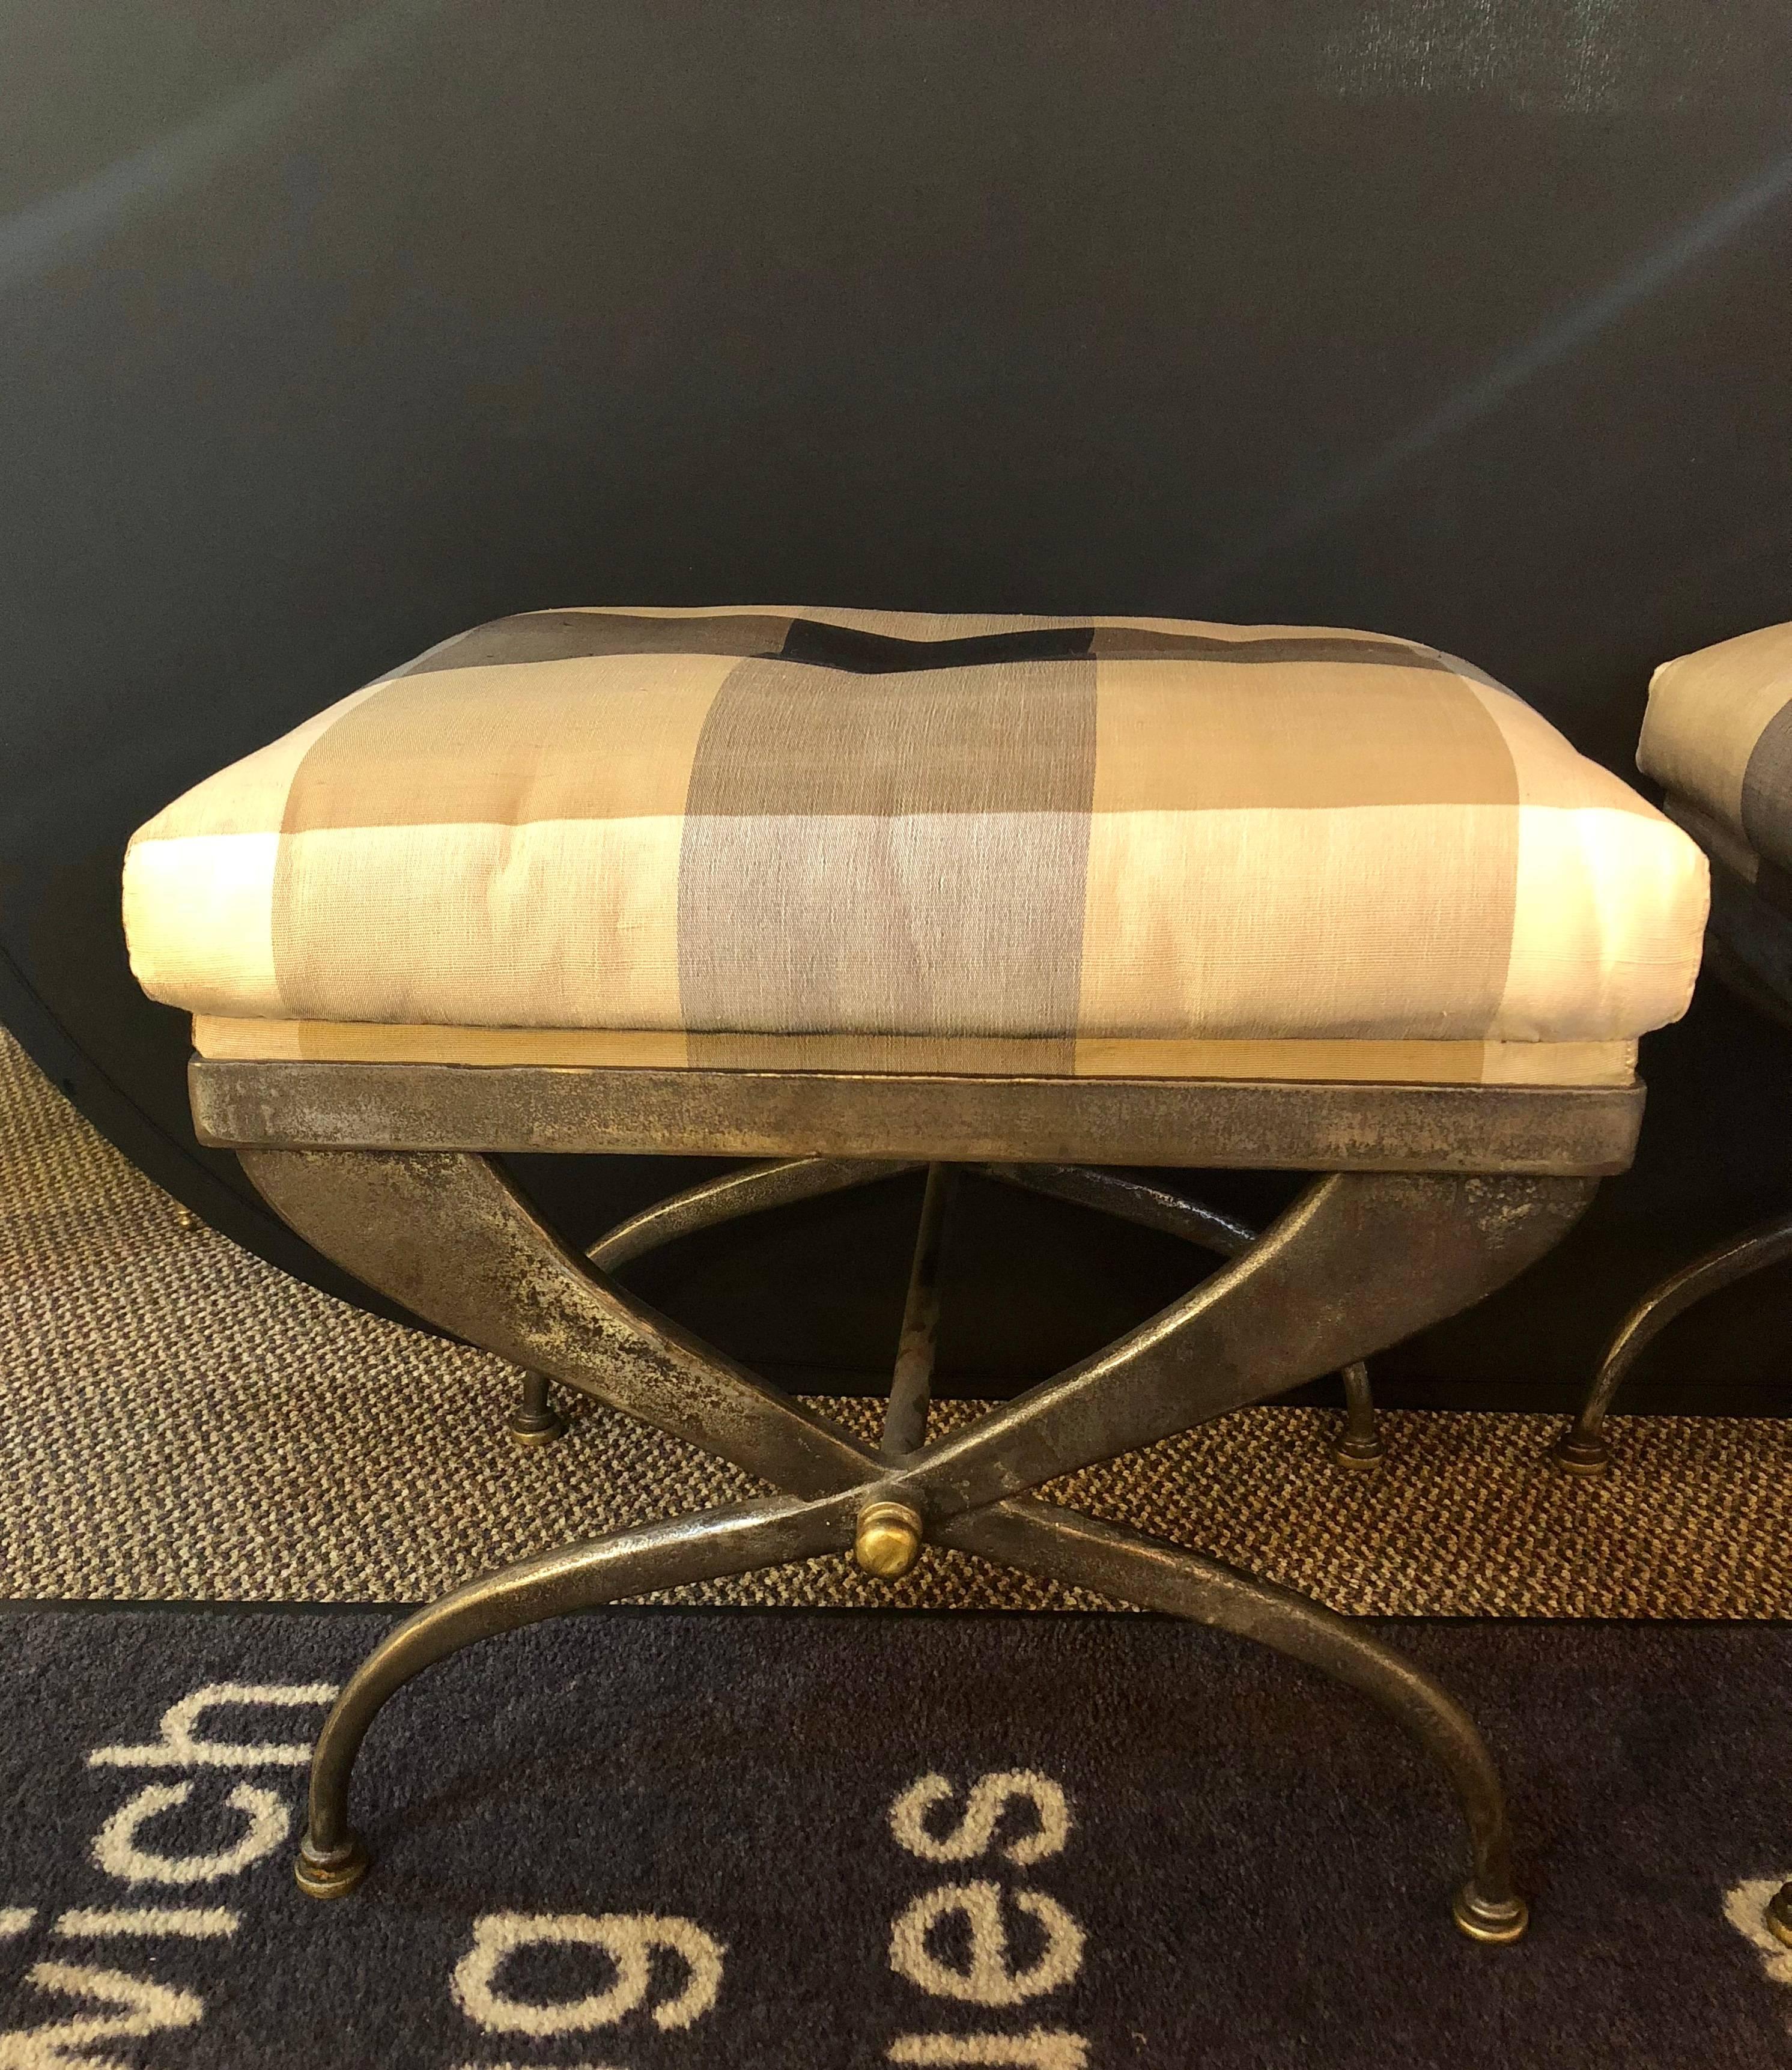 A very fine pair of Maison Jansen footstools or benches having an X-Design steel and bronze-mounted frame. A fantastic and heavy pair of solid steel and bronze mounted benches. Each having a Burberry style fabric that has a fitted wood base to sit